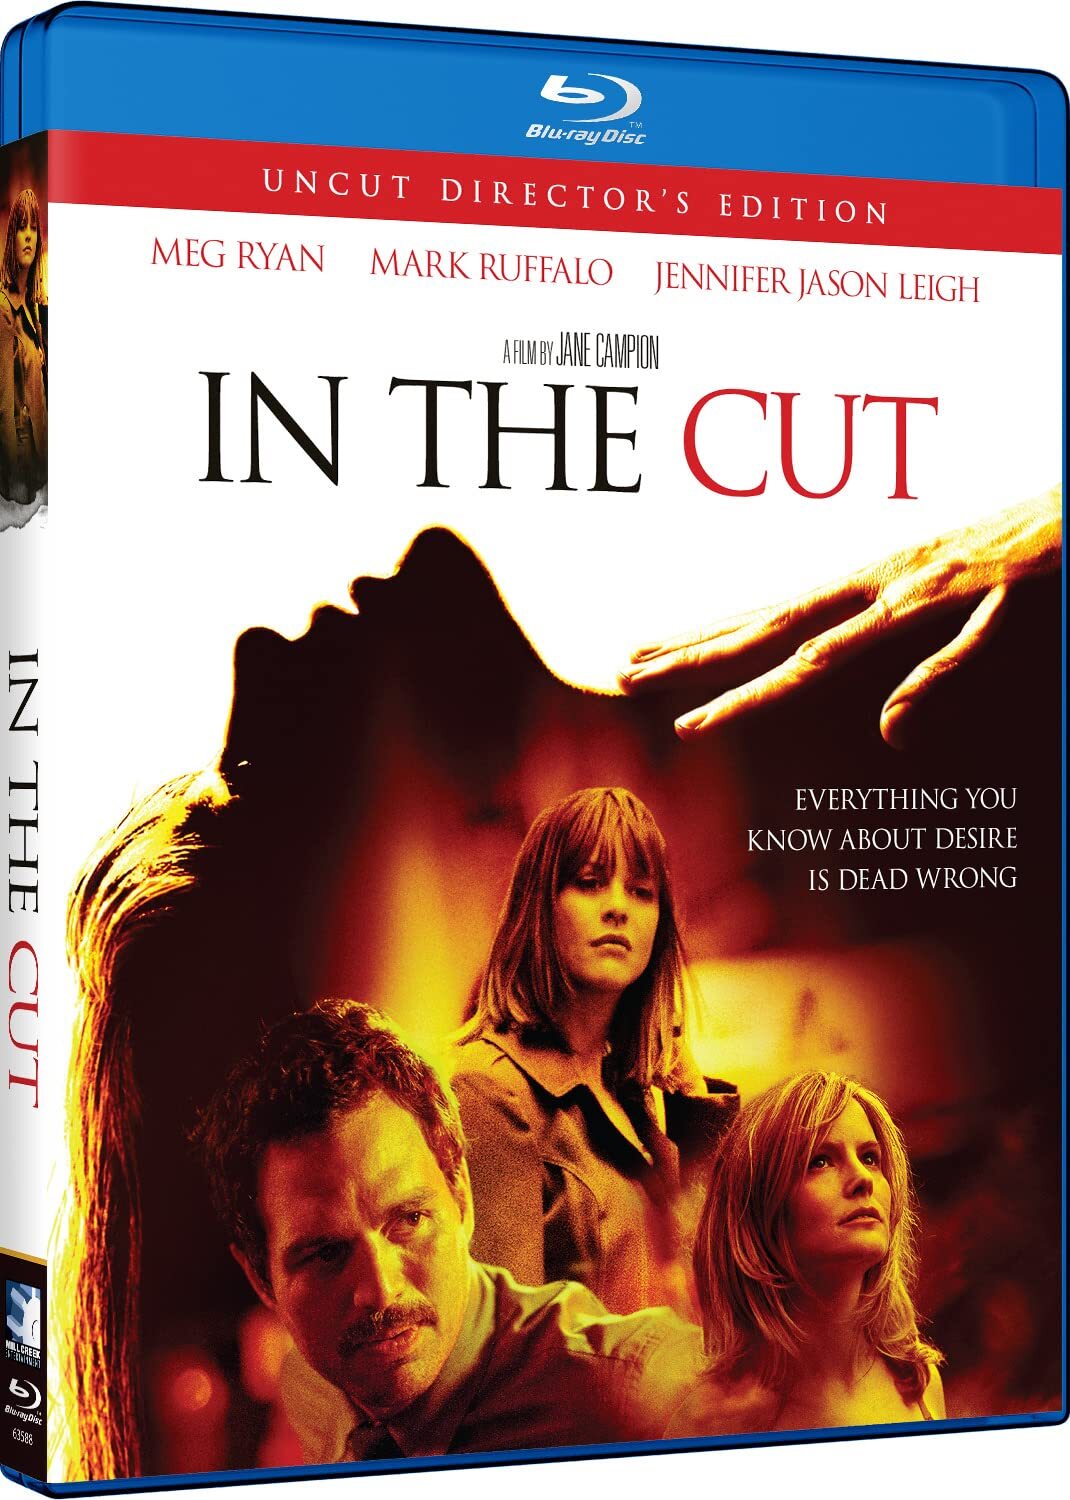 In the Cut 20th Anniversary Director's Edition Blu-ray